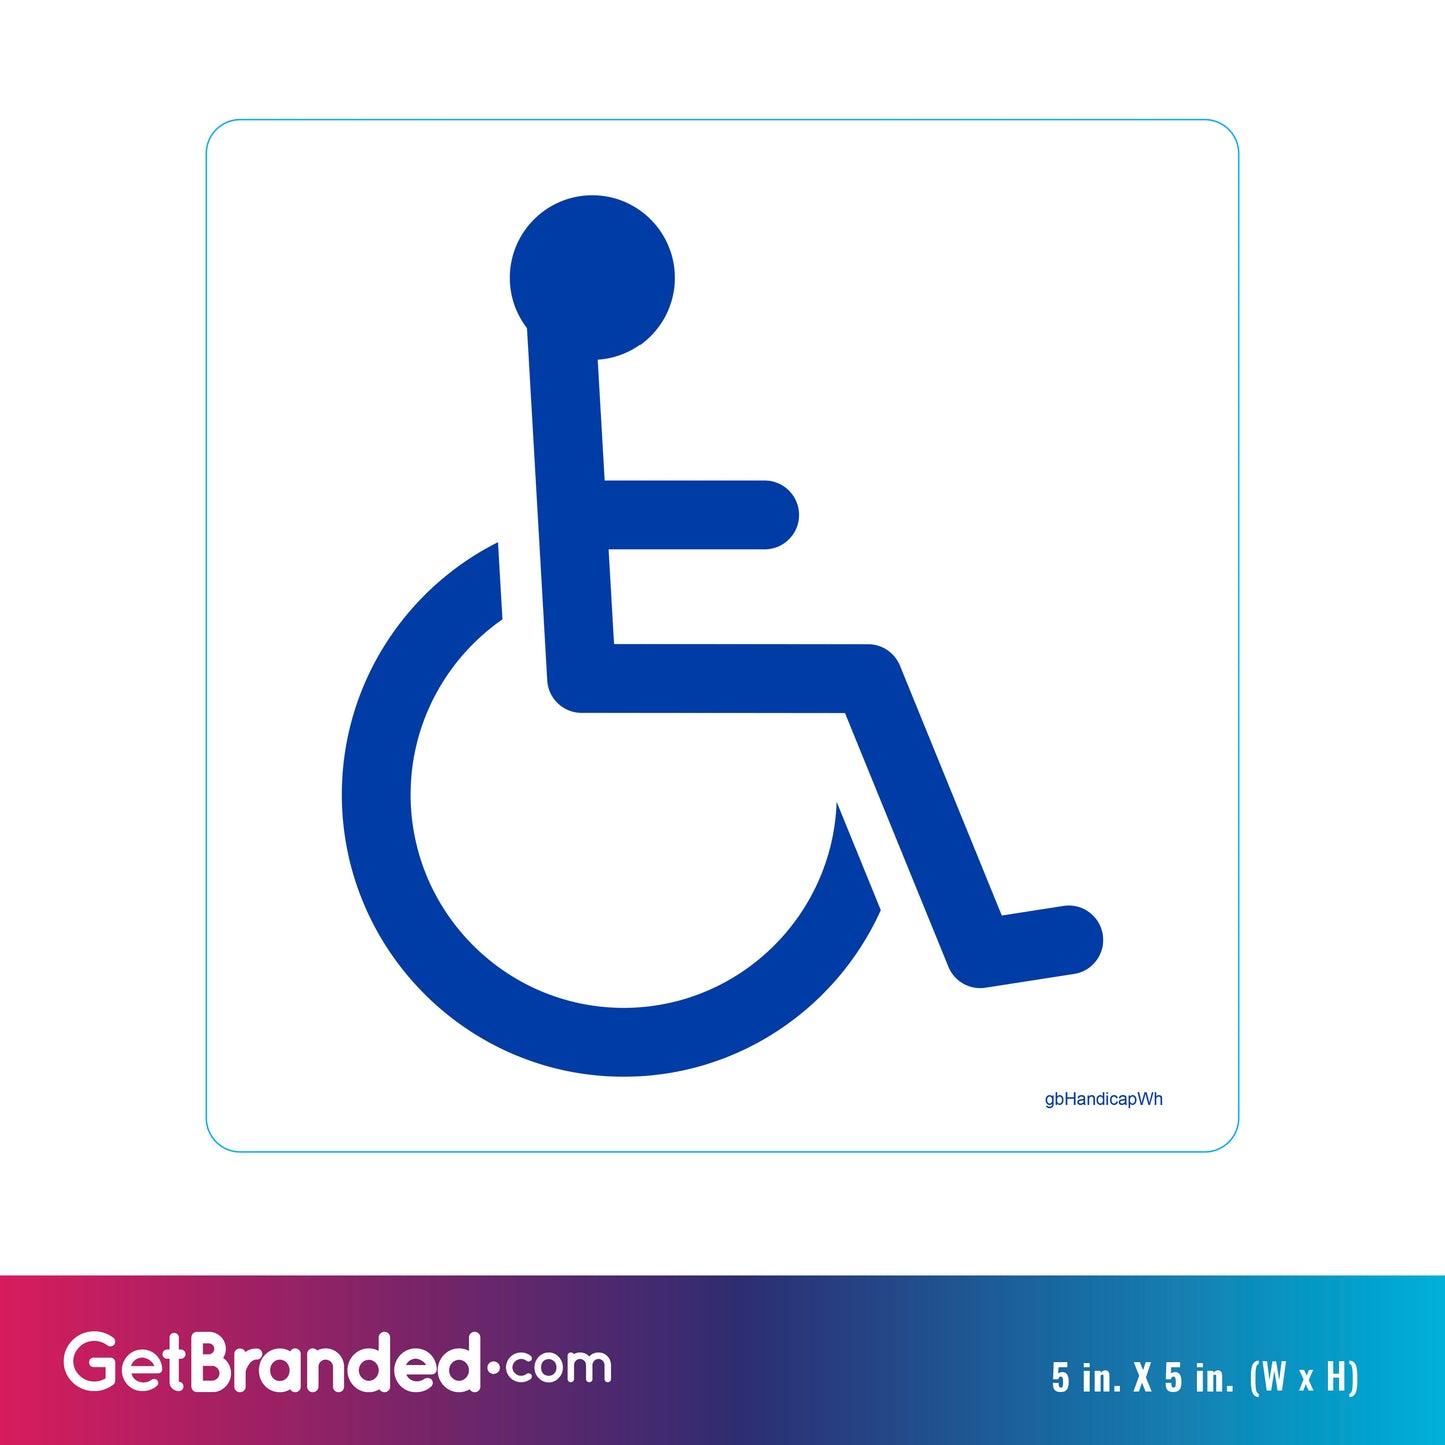 ADA Handicap Decal in White size guide.